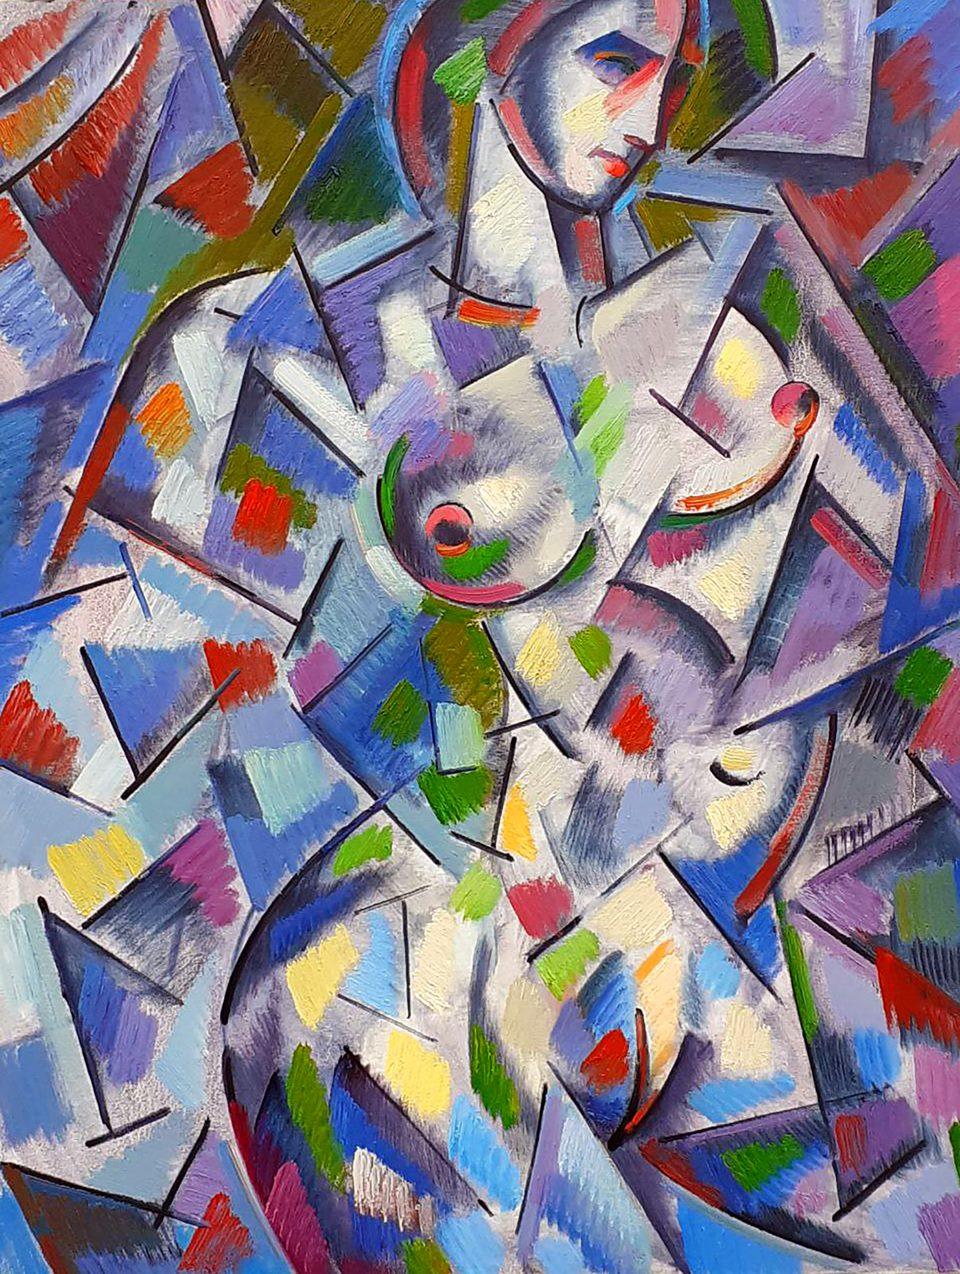 The Model, Cubism, Figurative, Original oil Painting, Ready to Hang